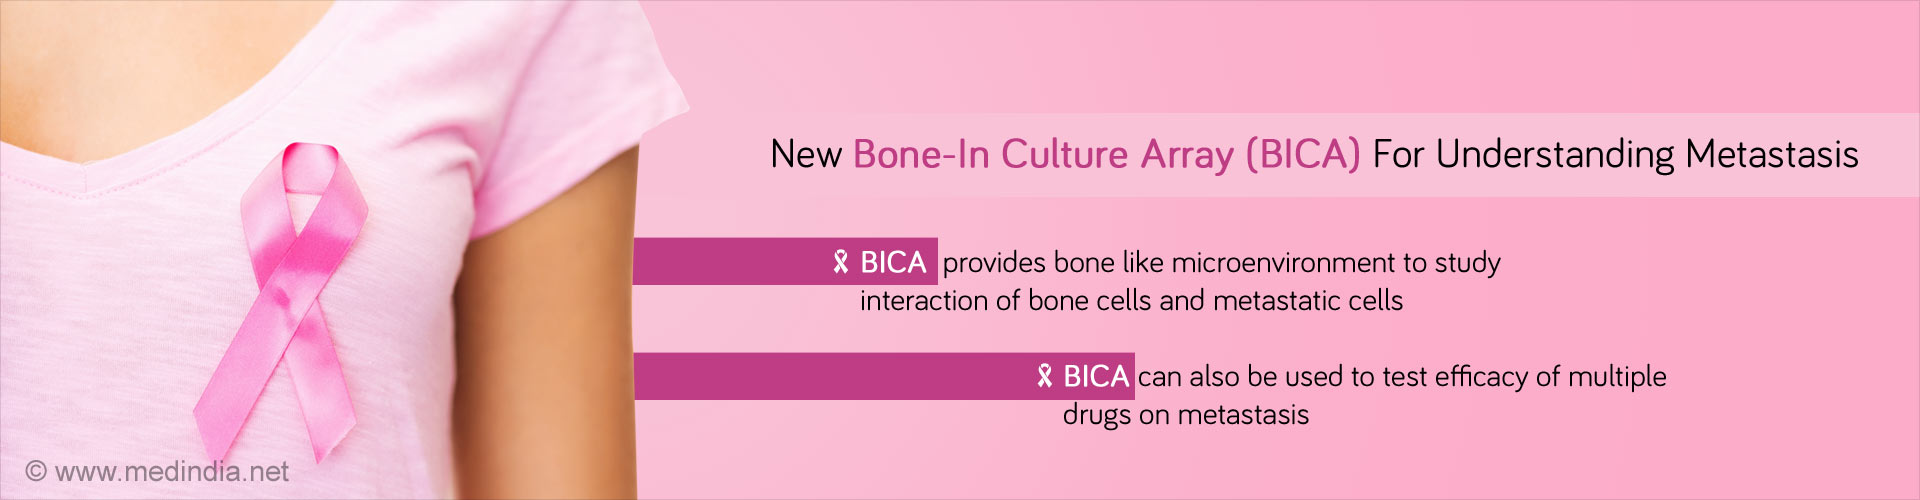 New bone-in culture array (BICA) for understanding metastasis
- BICA provides bone like micro-environment to study interaction of bone cells and metastasic cells
- BICA can also be used to test efficacy of multiple drugs on metastasis